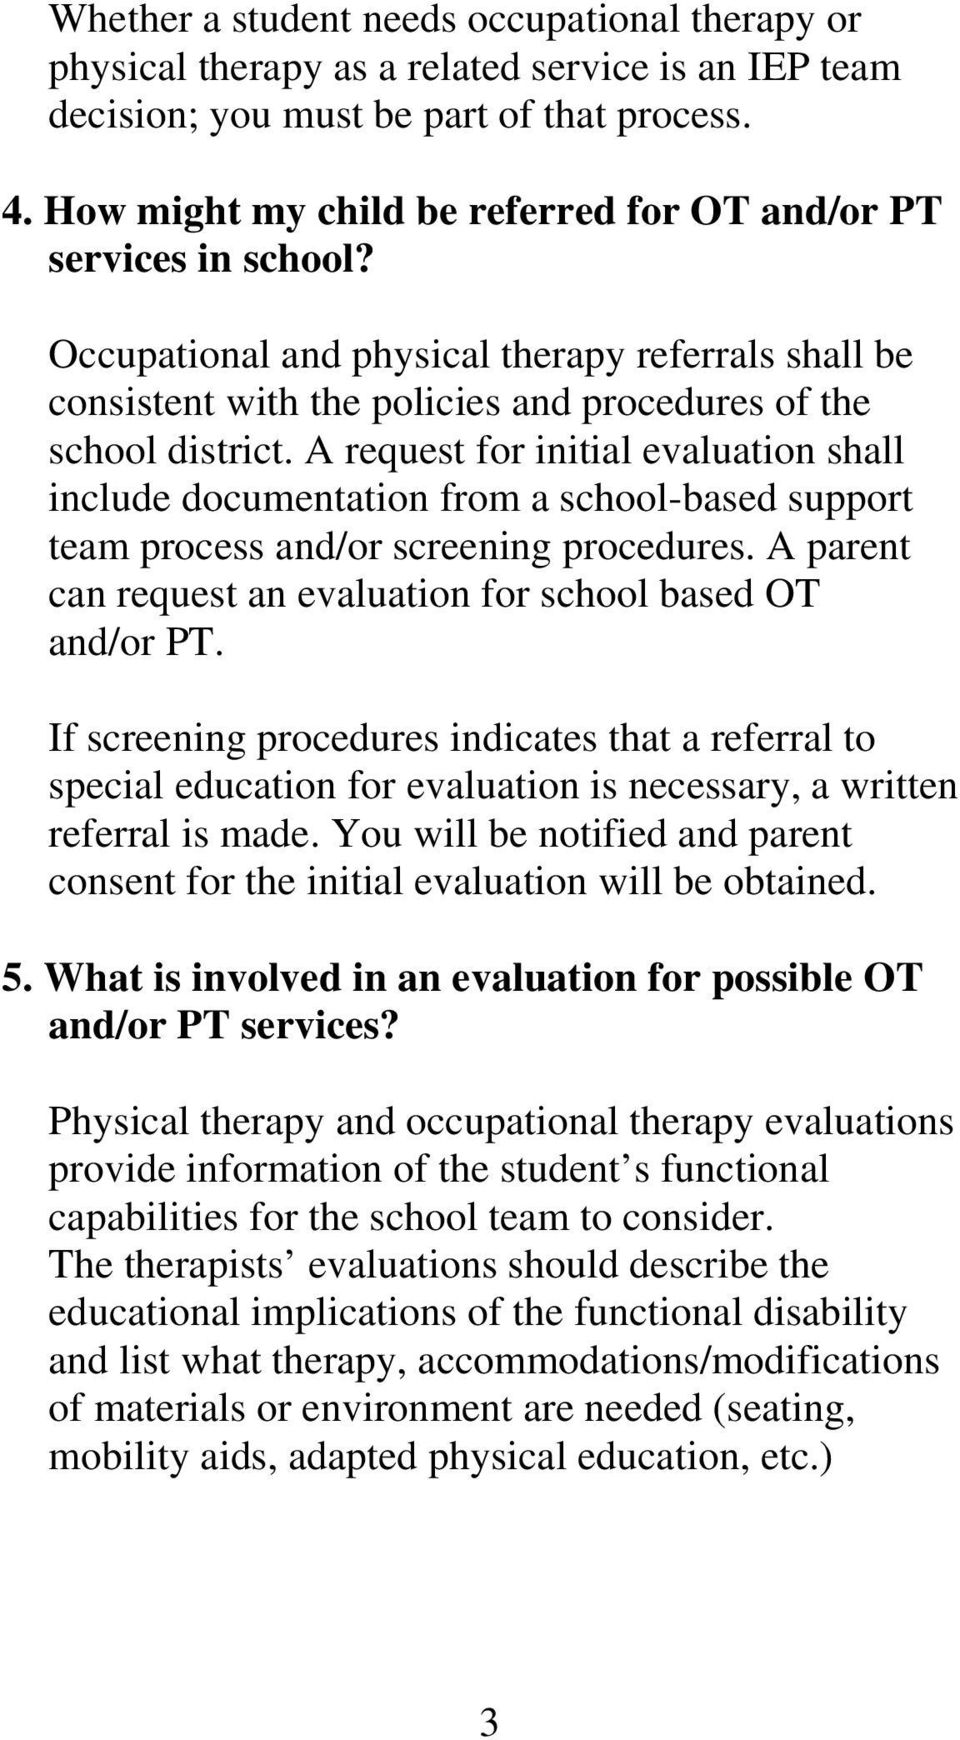 A request for initial evaluation shall include documentation from a school-based support team process and/or screening procedures. A parent can request an evaluation for school based OT and/or PT.